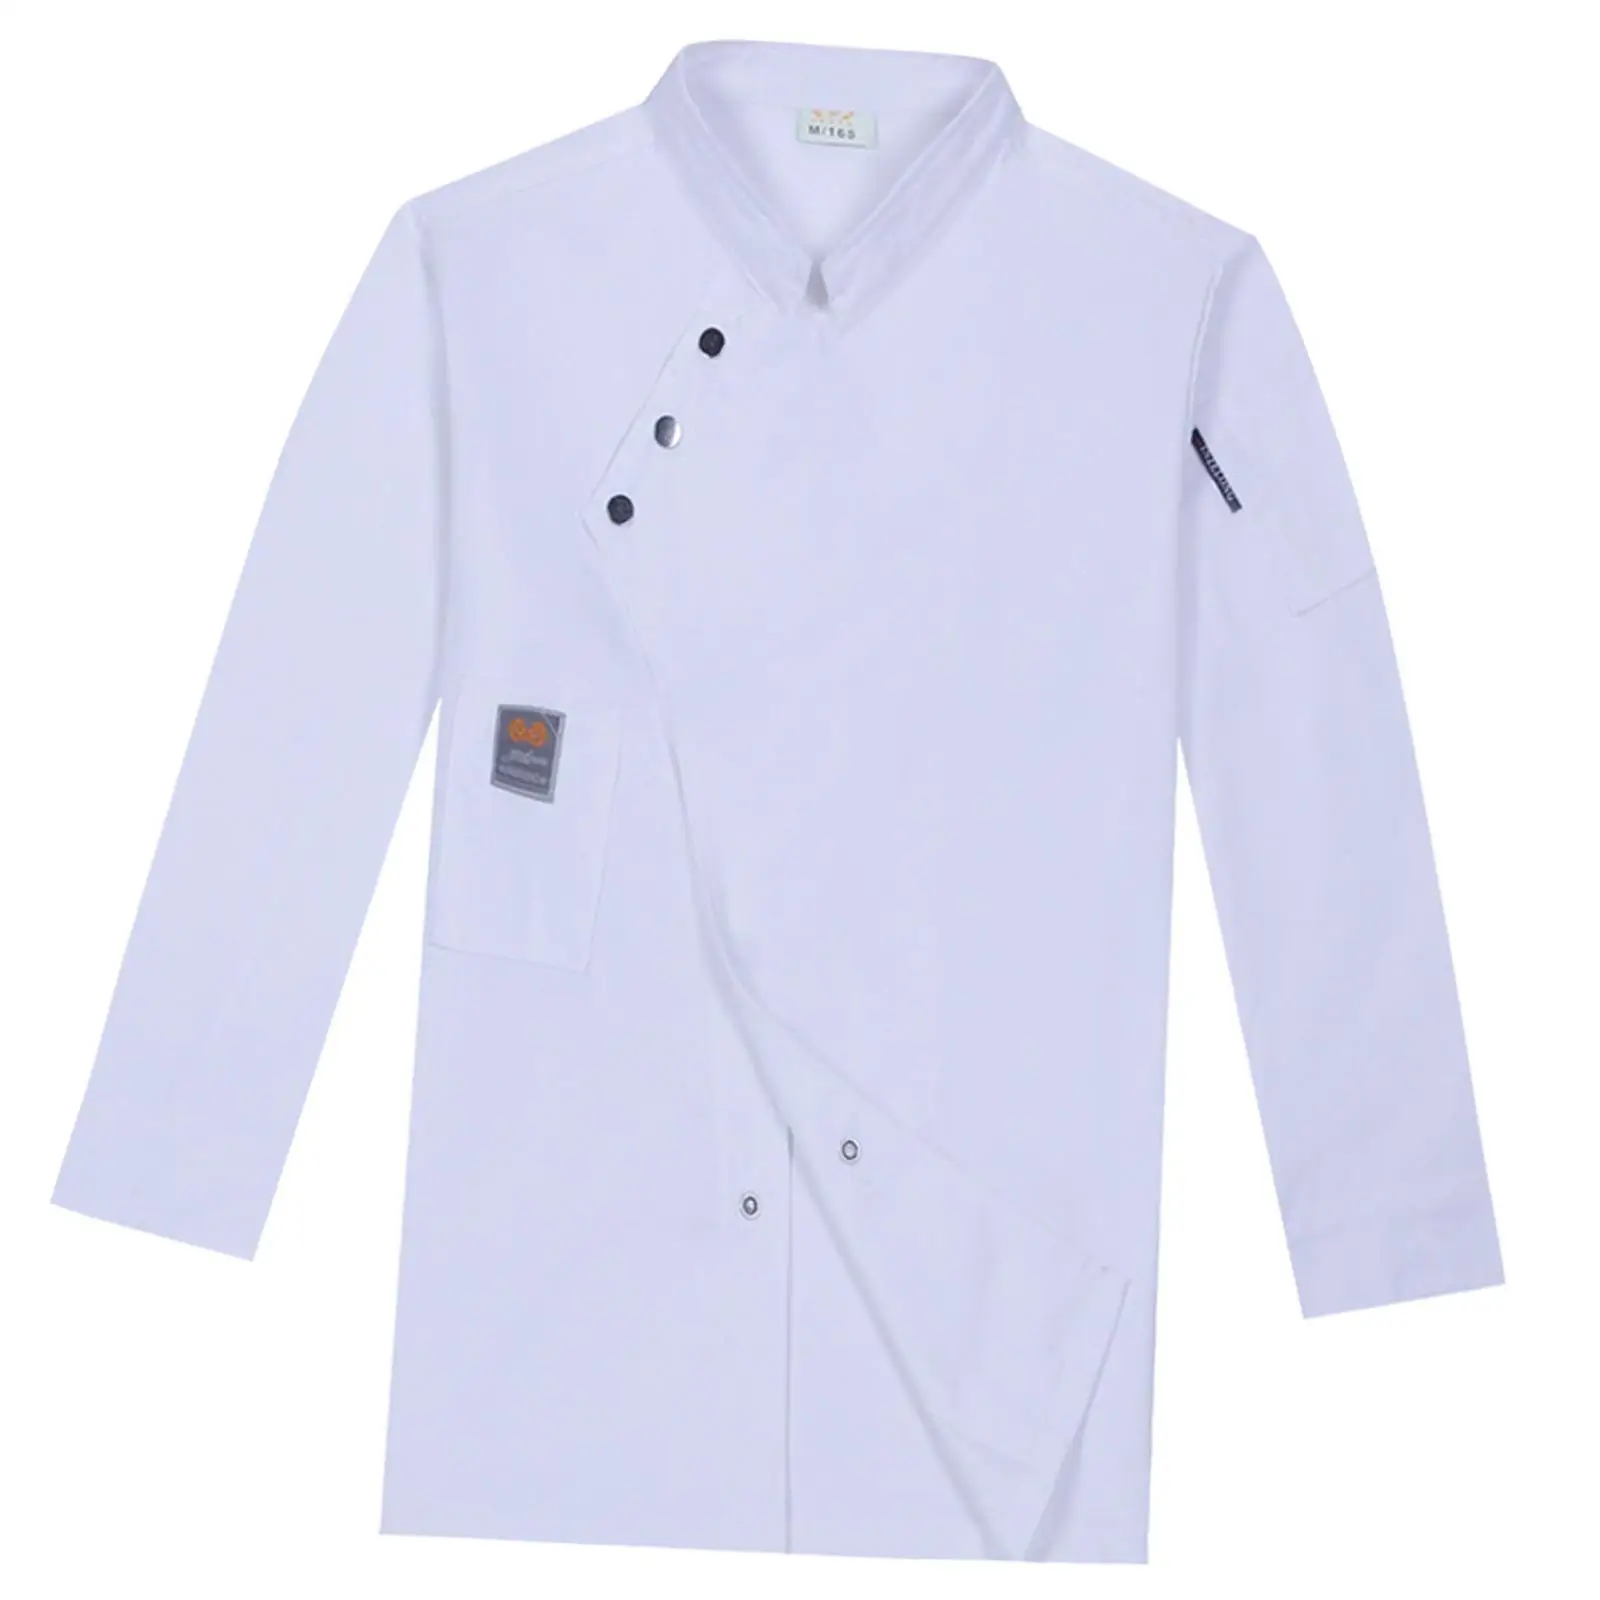 Unisex Chef Coat Chef Wear Classic Waiter Apparel Lightweight Breathable Chef